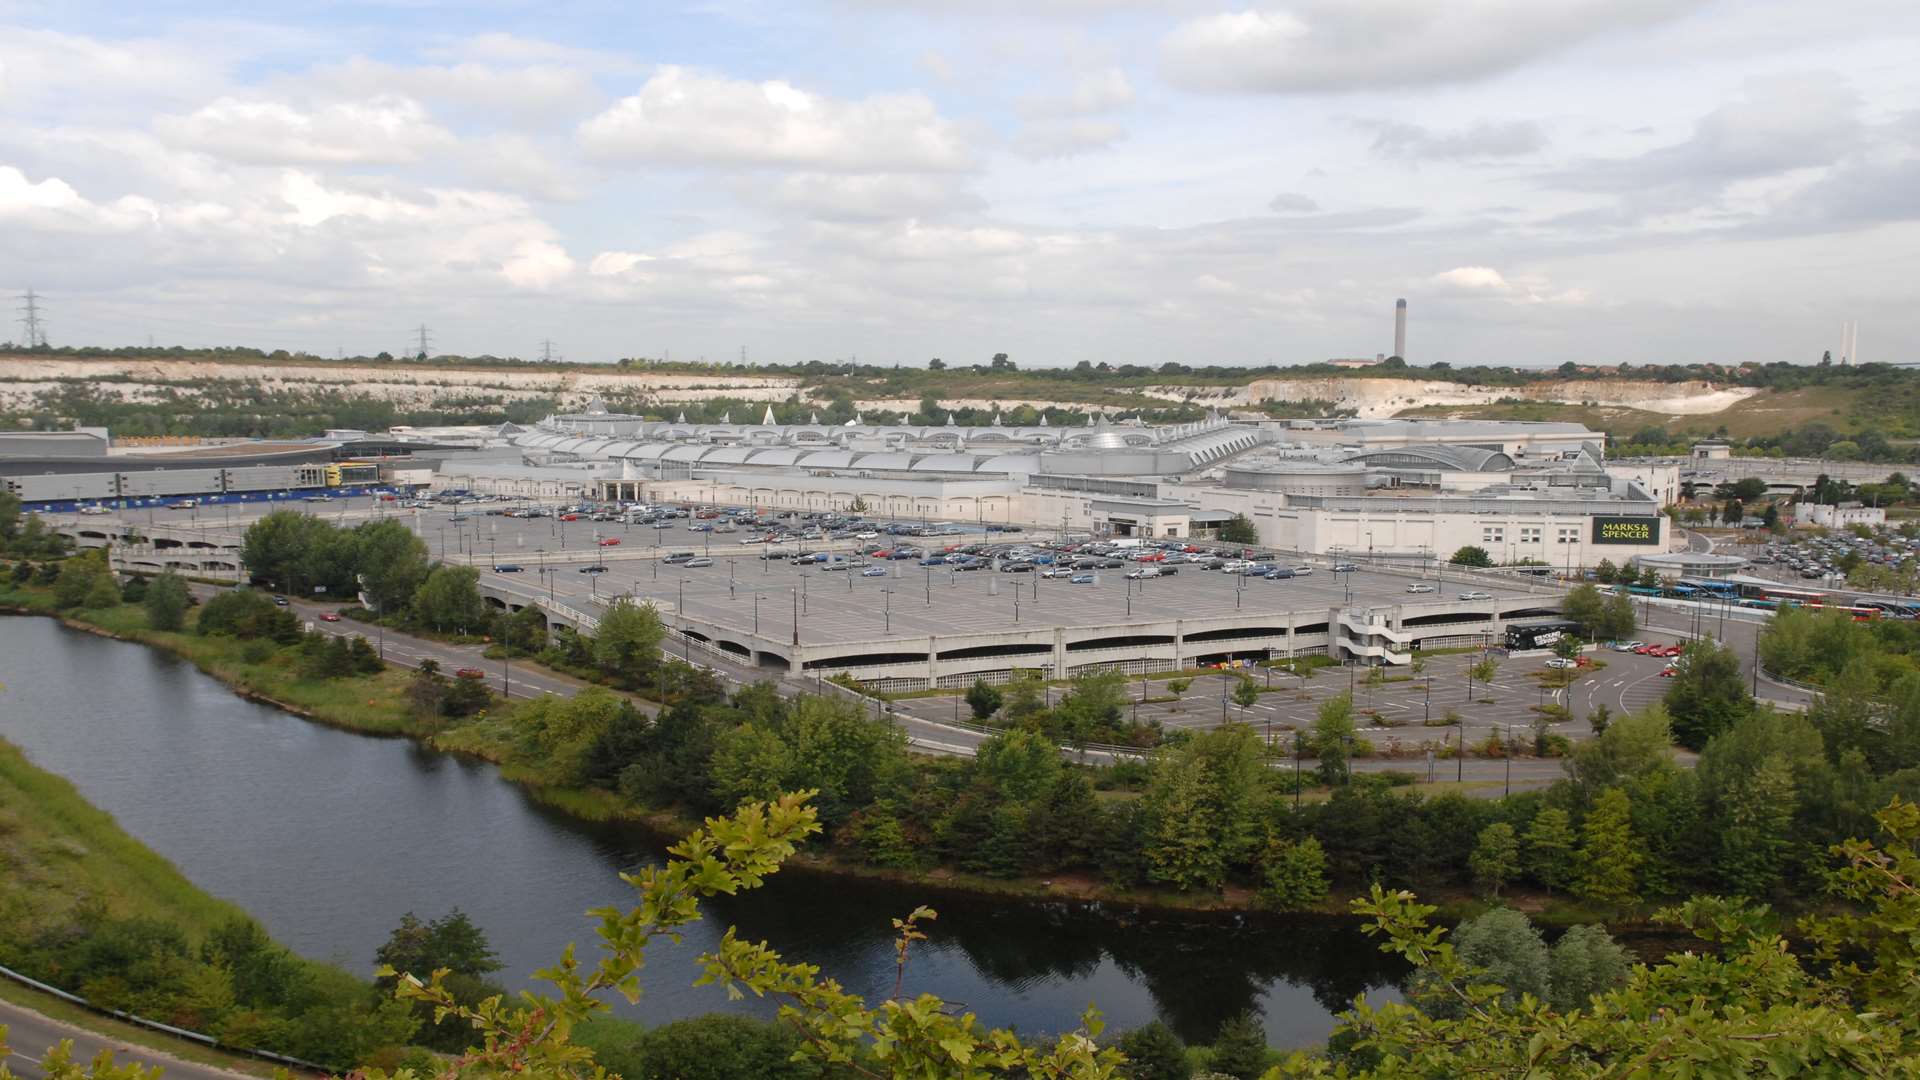 Bluewater shopping centre sits in a former chalk quarry